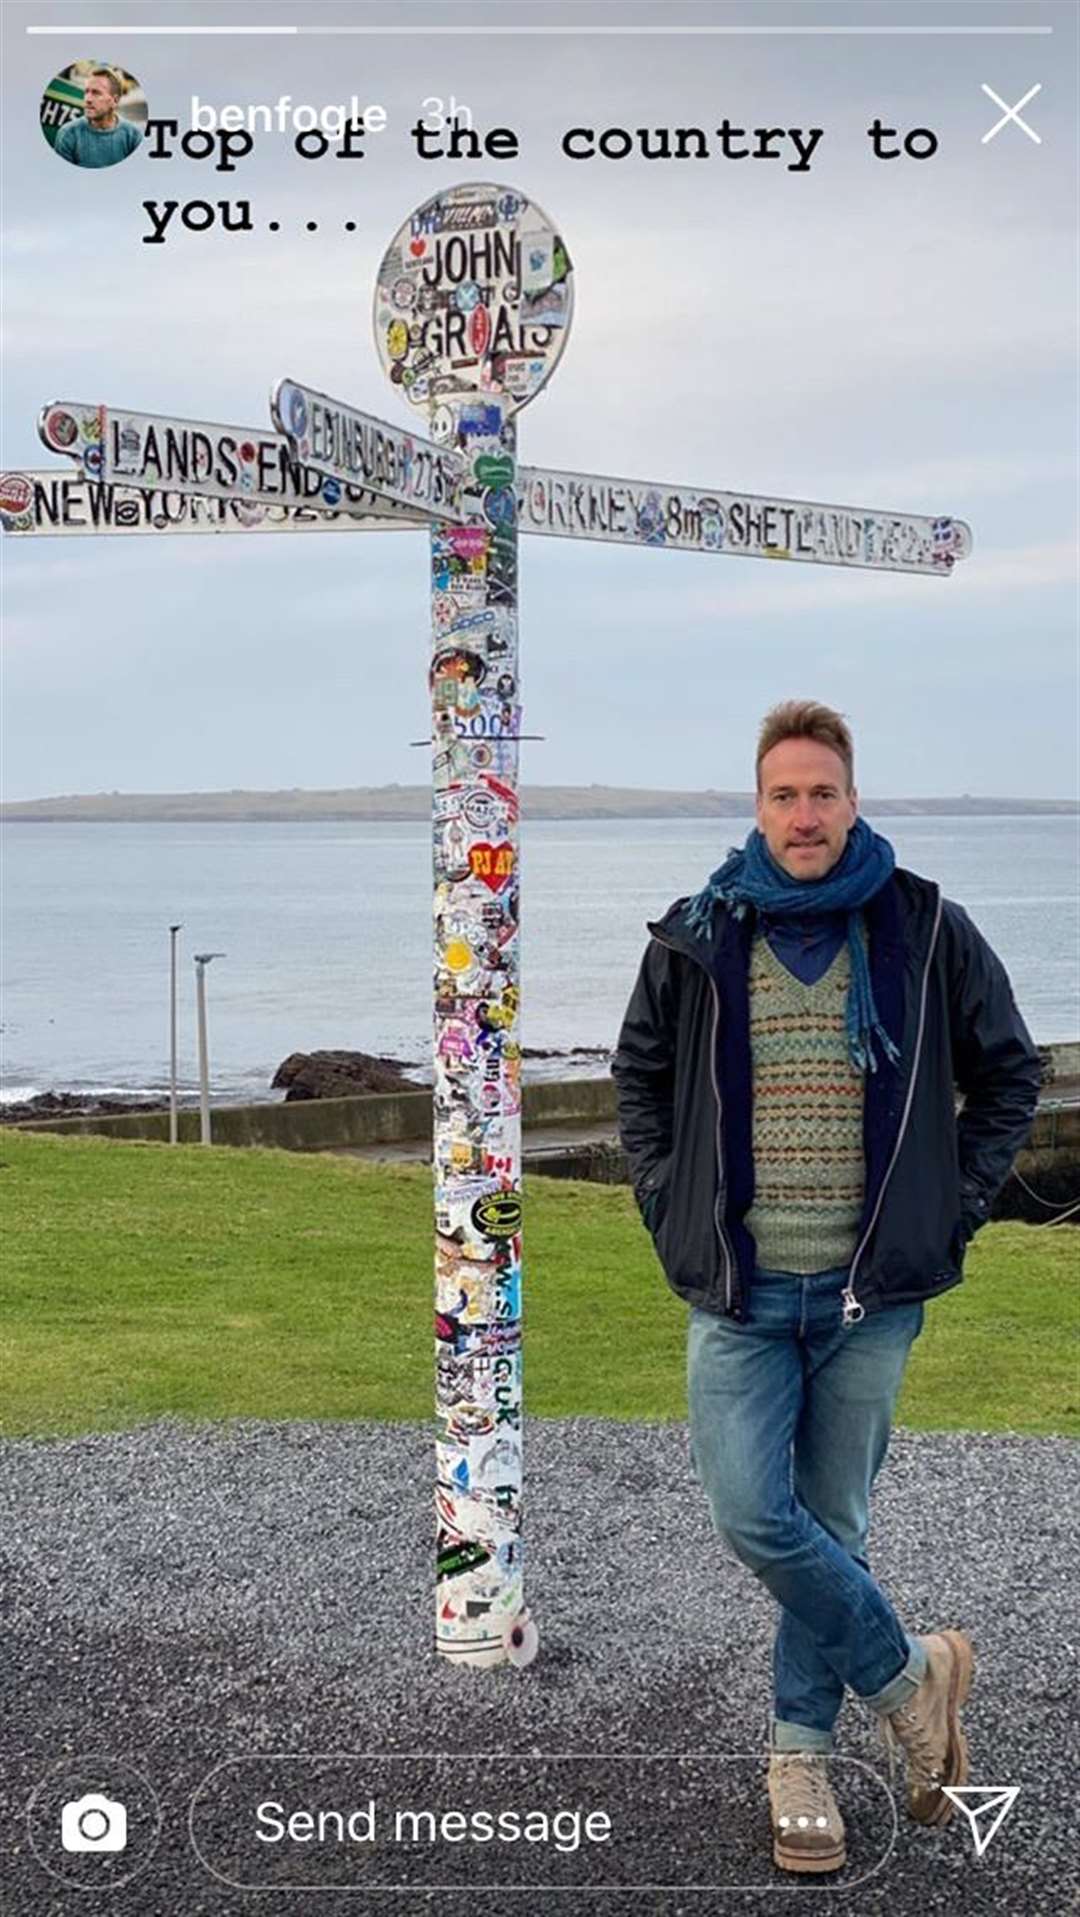 Ben Fogle spent two days filming at Puffin Croft petting farm and sent out this photograph to his Twitter fans to prove he had visited John O'Groats.